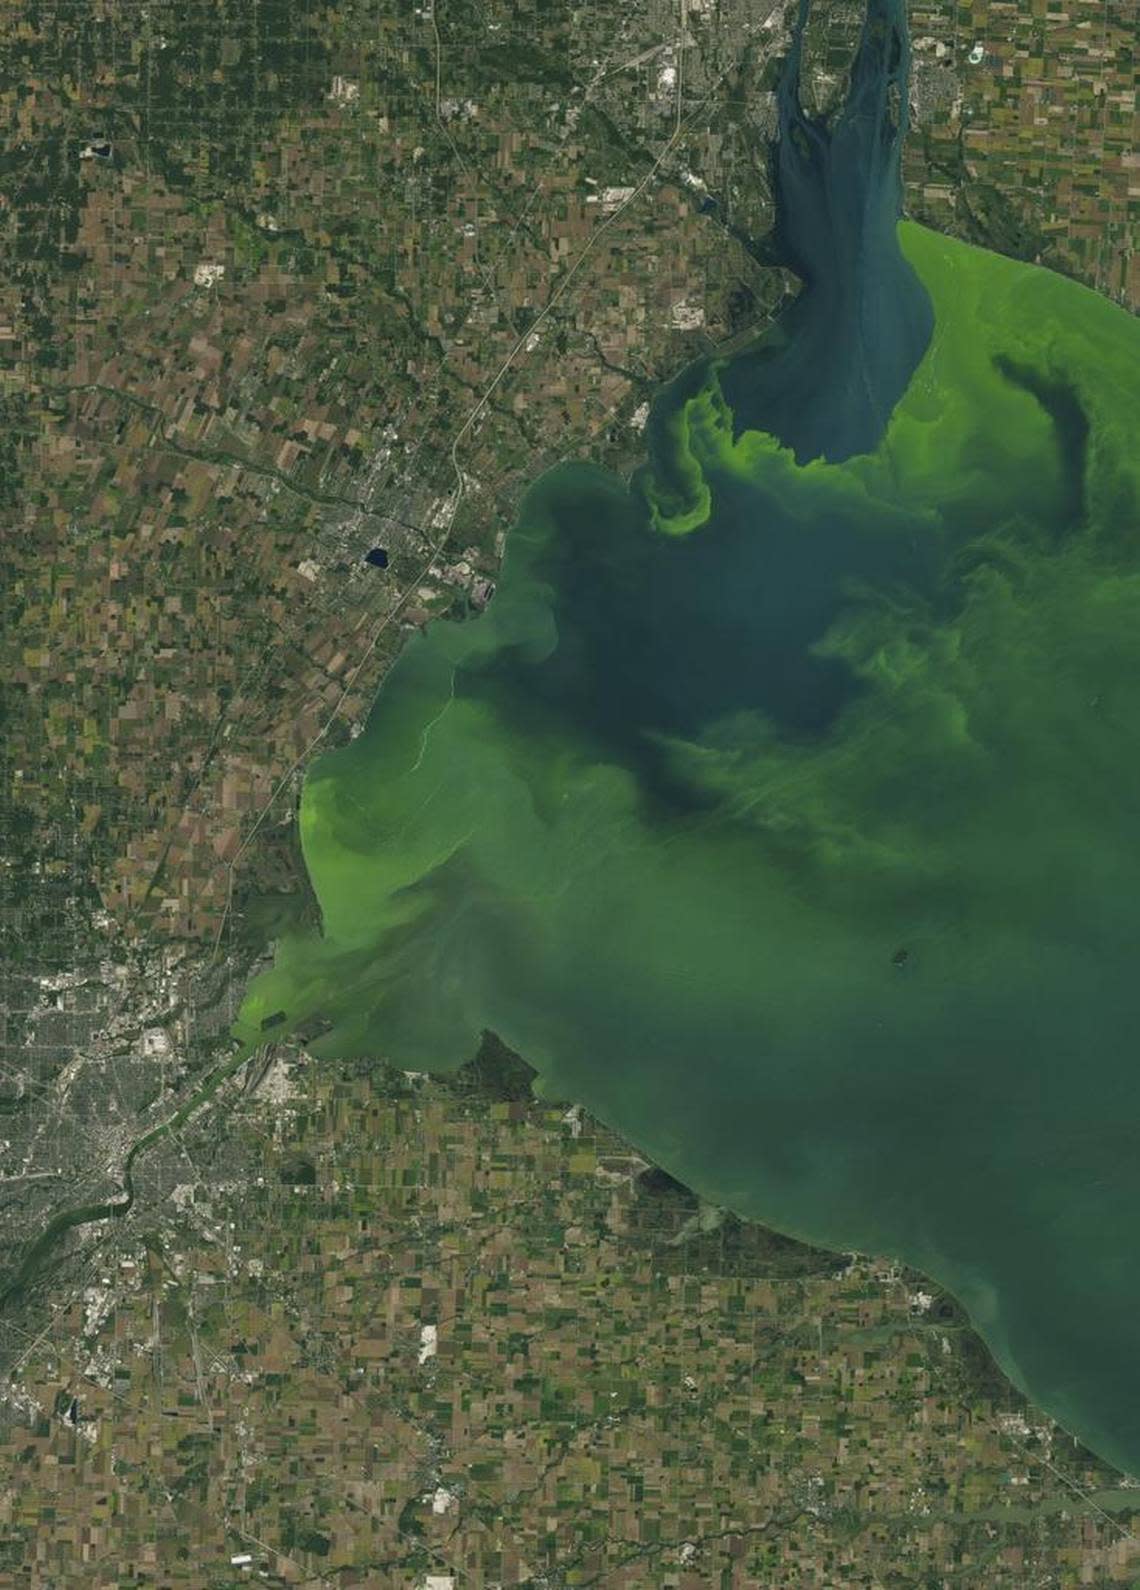 This Sept. 26, 2017 satellite image made available by NASA shows Toledo, Ohio in the lower left corner with a large phytoplankton bloom in western Lake Erie. The bloom contains microcystis, a type of freshwater cyanobacteria that produce toxins that can contaminate drinking water and pose a risk to human and animal health.